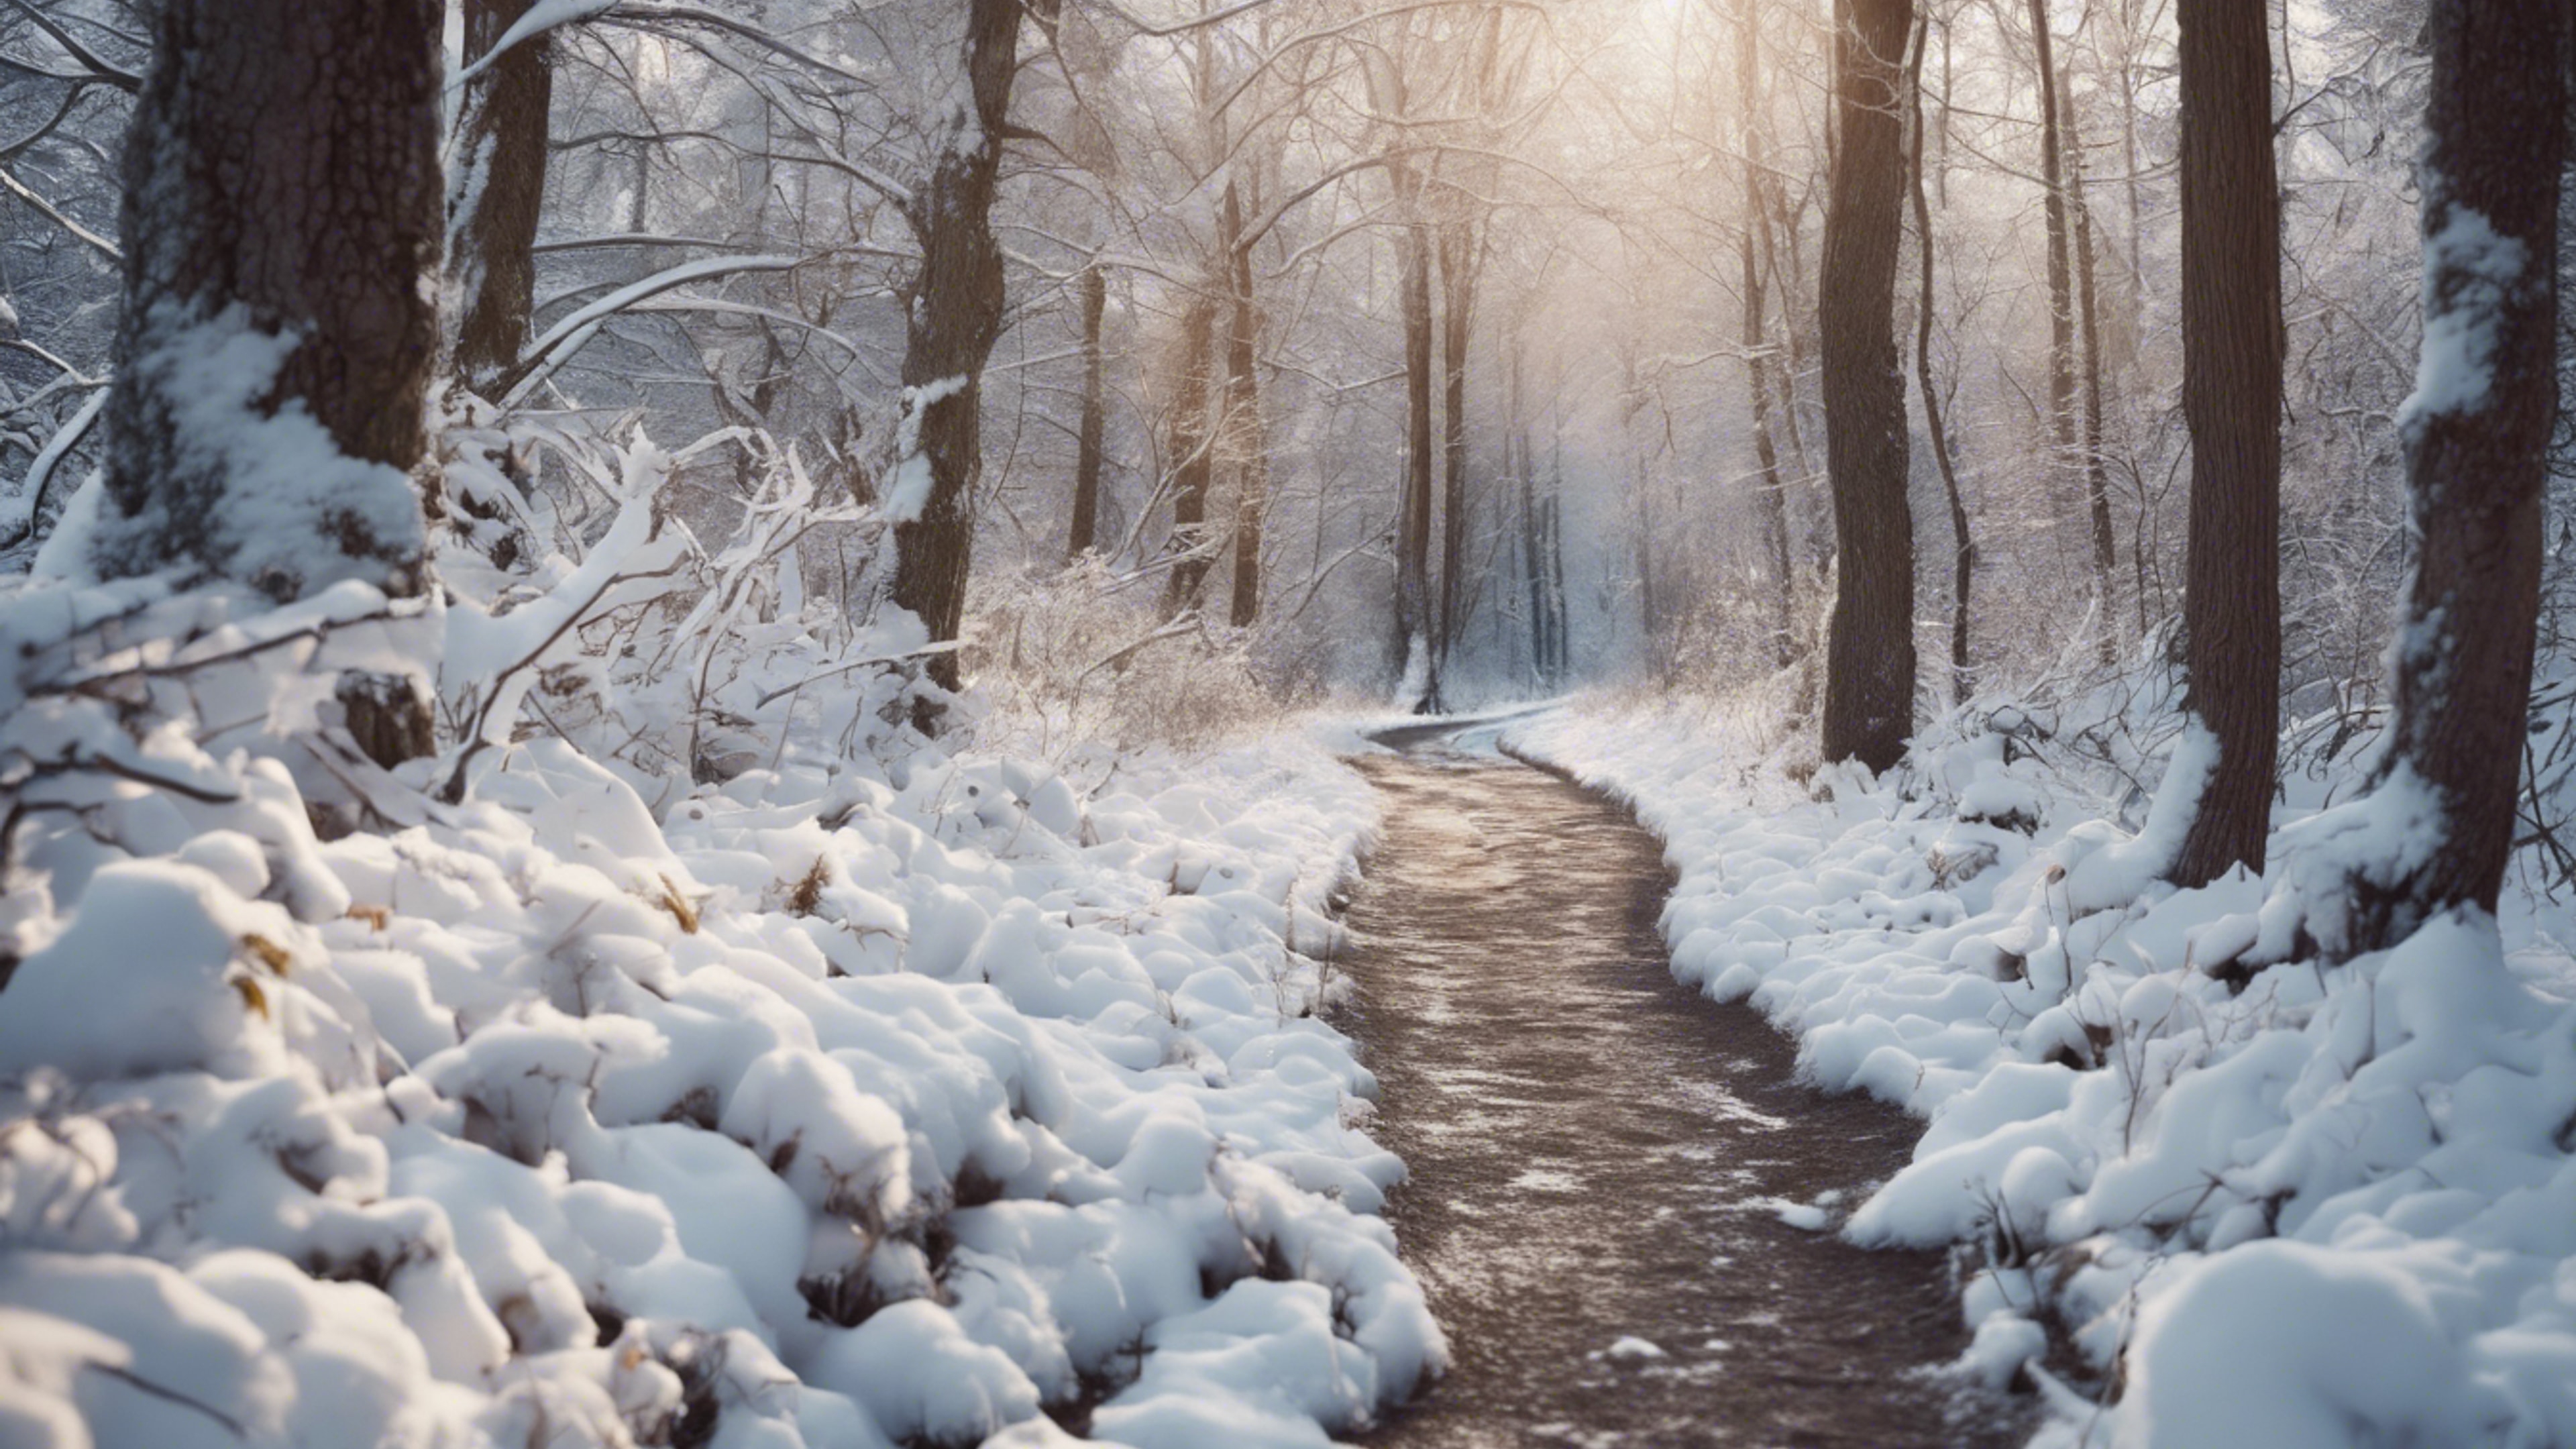 A snow-covered path winding through a dense winter forest, inviting wanderers to explore its quiet beauty. Wallpaper[1c259ae115404f0f9e10]